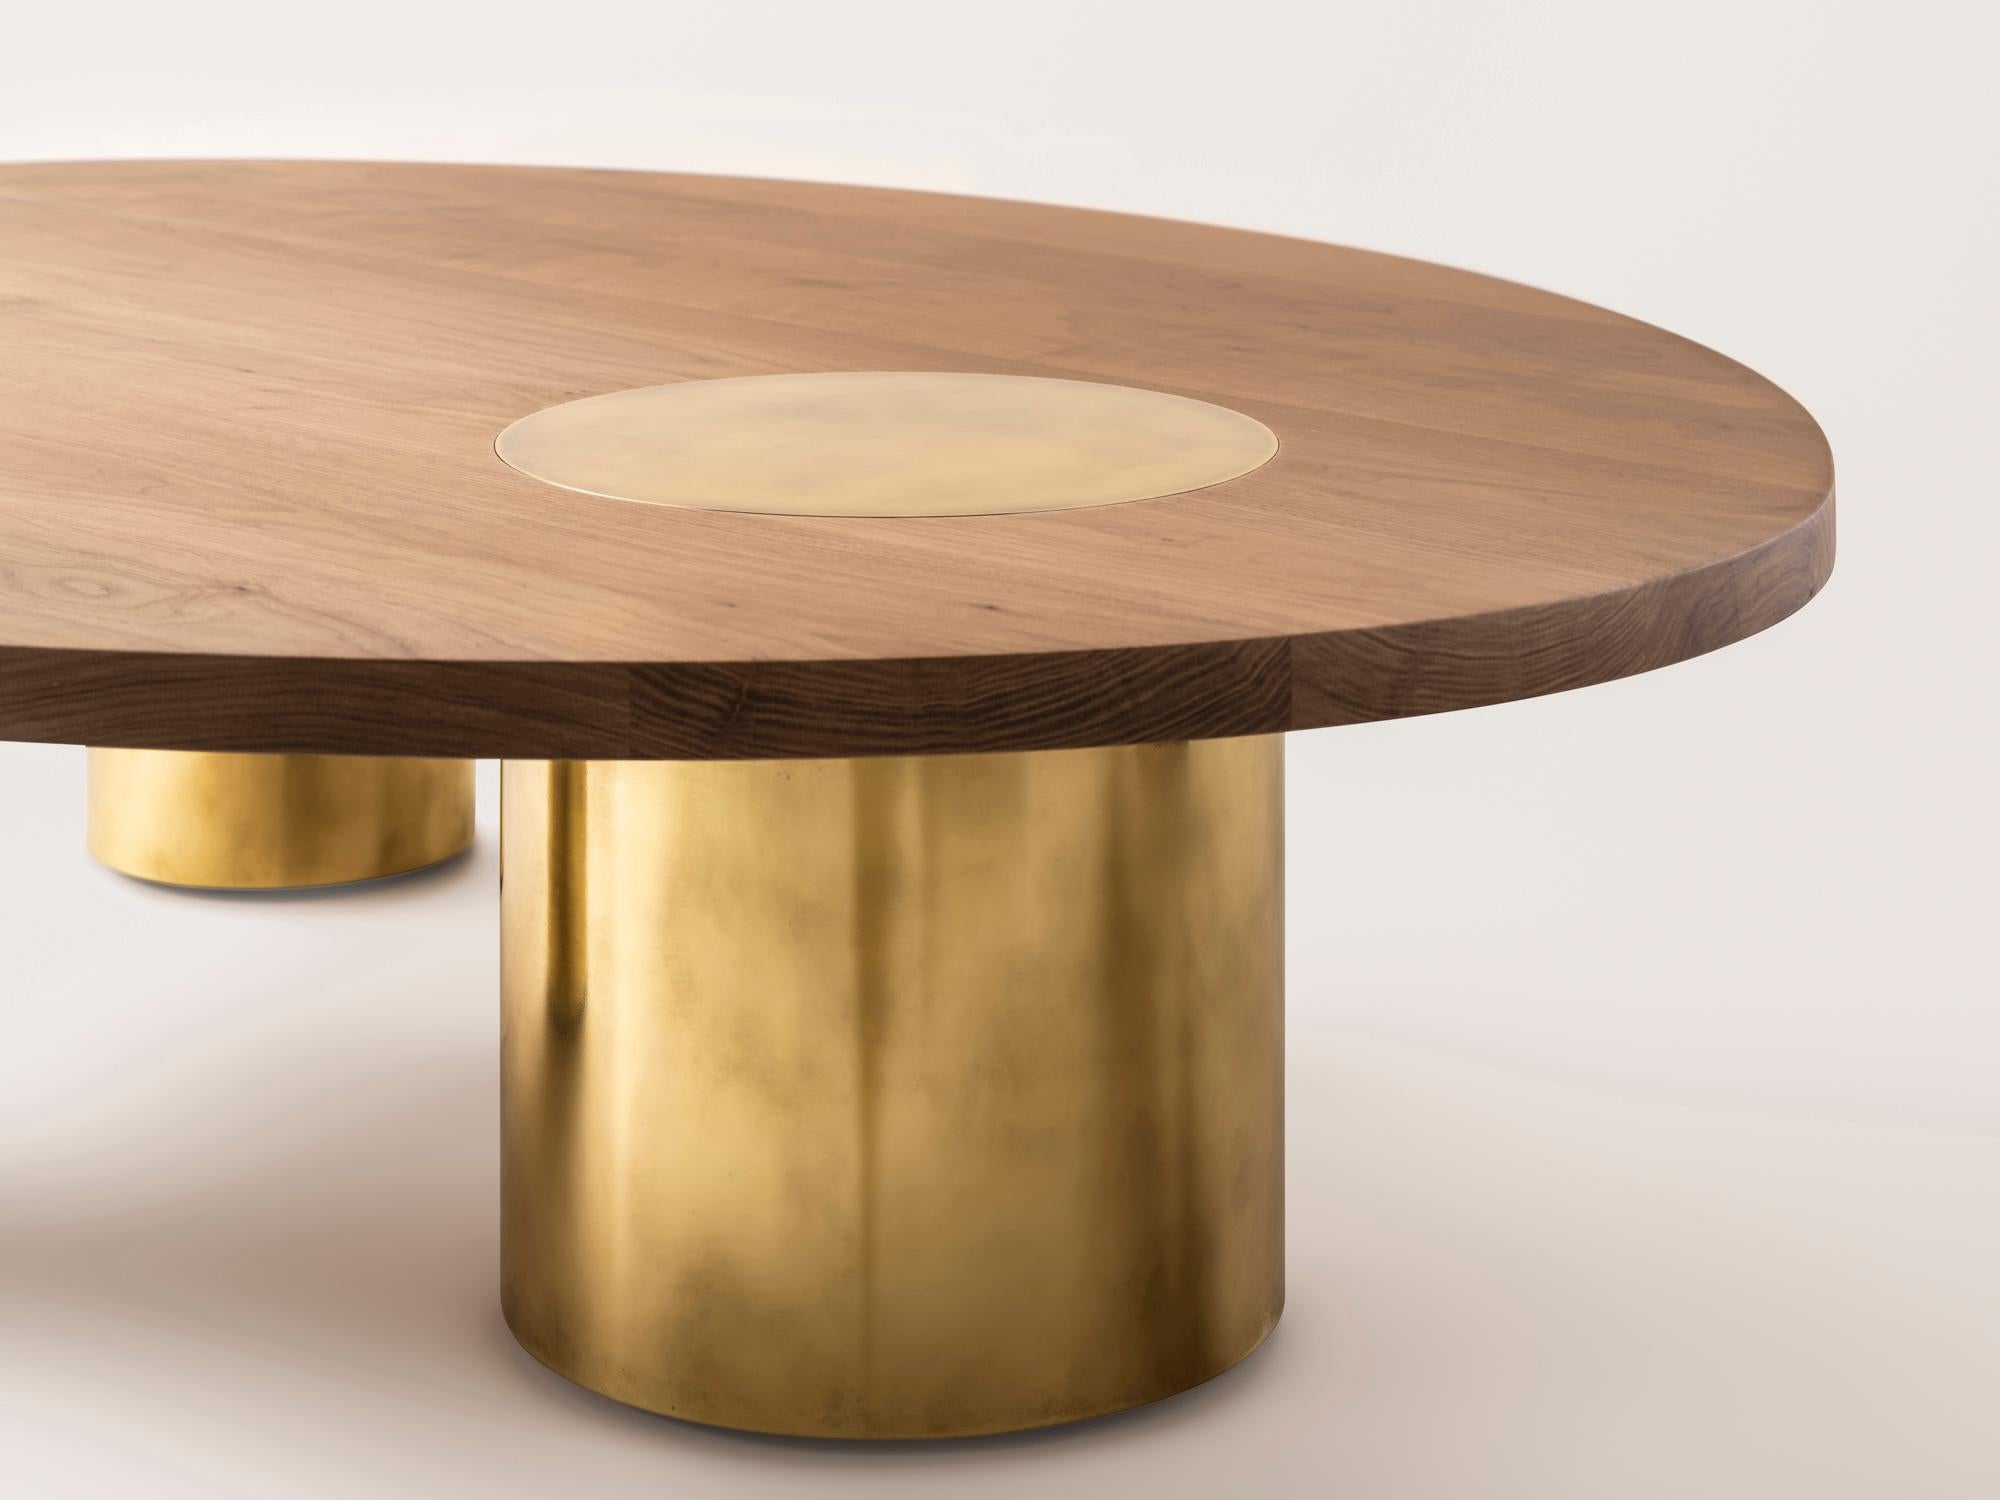 Silo Coffee Table Large - Bleached Walnut and Burnished Brass In New Condition For Sale In New York, NY